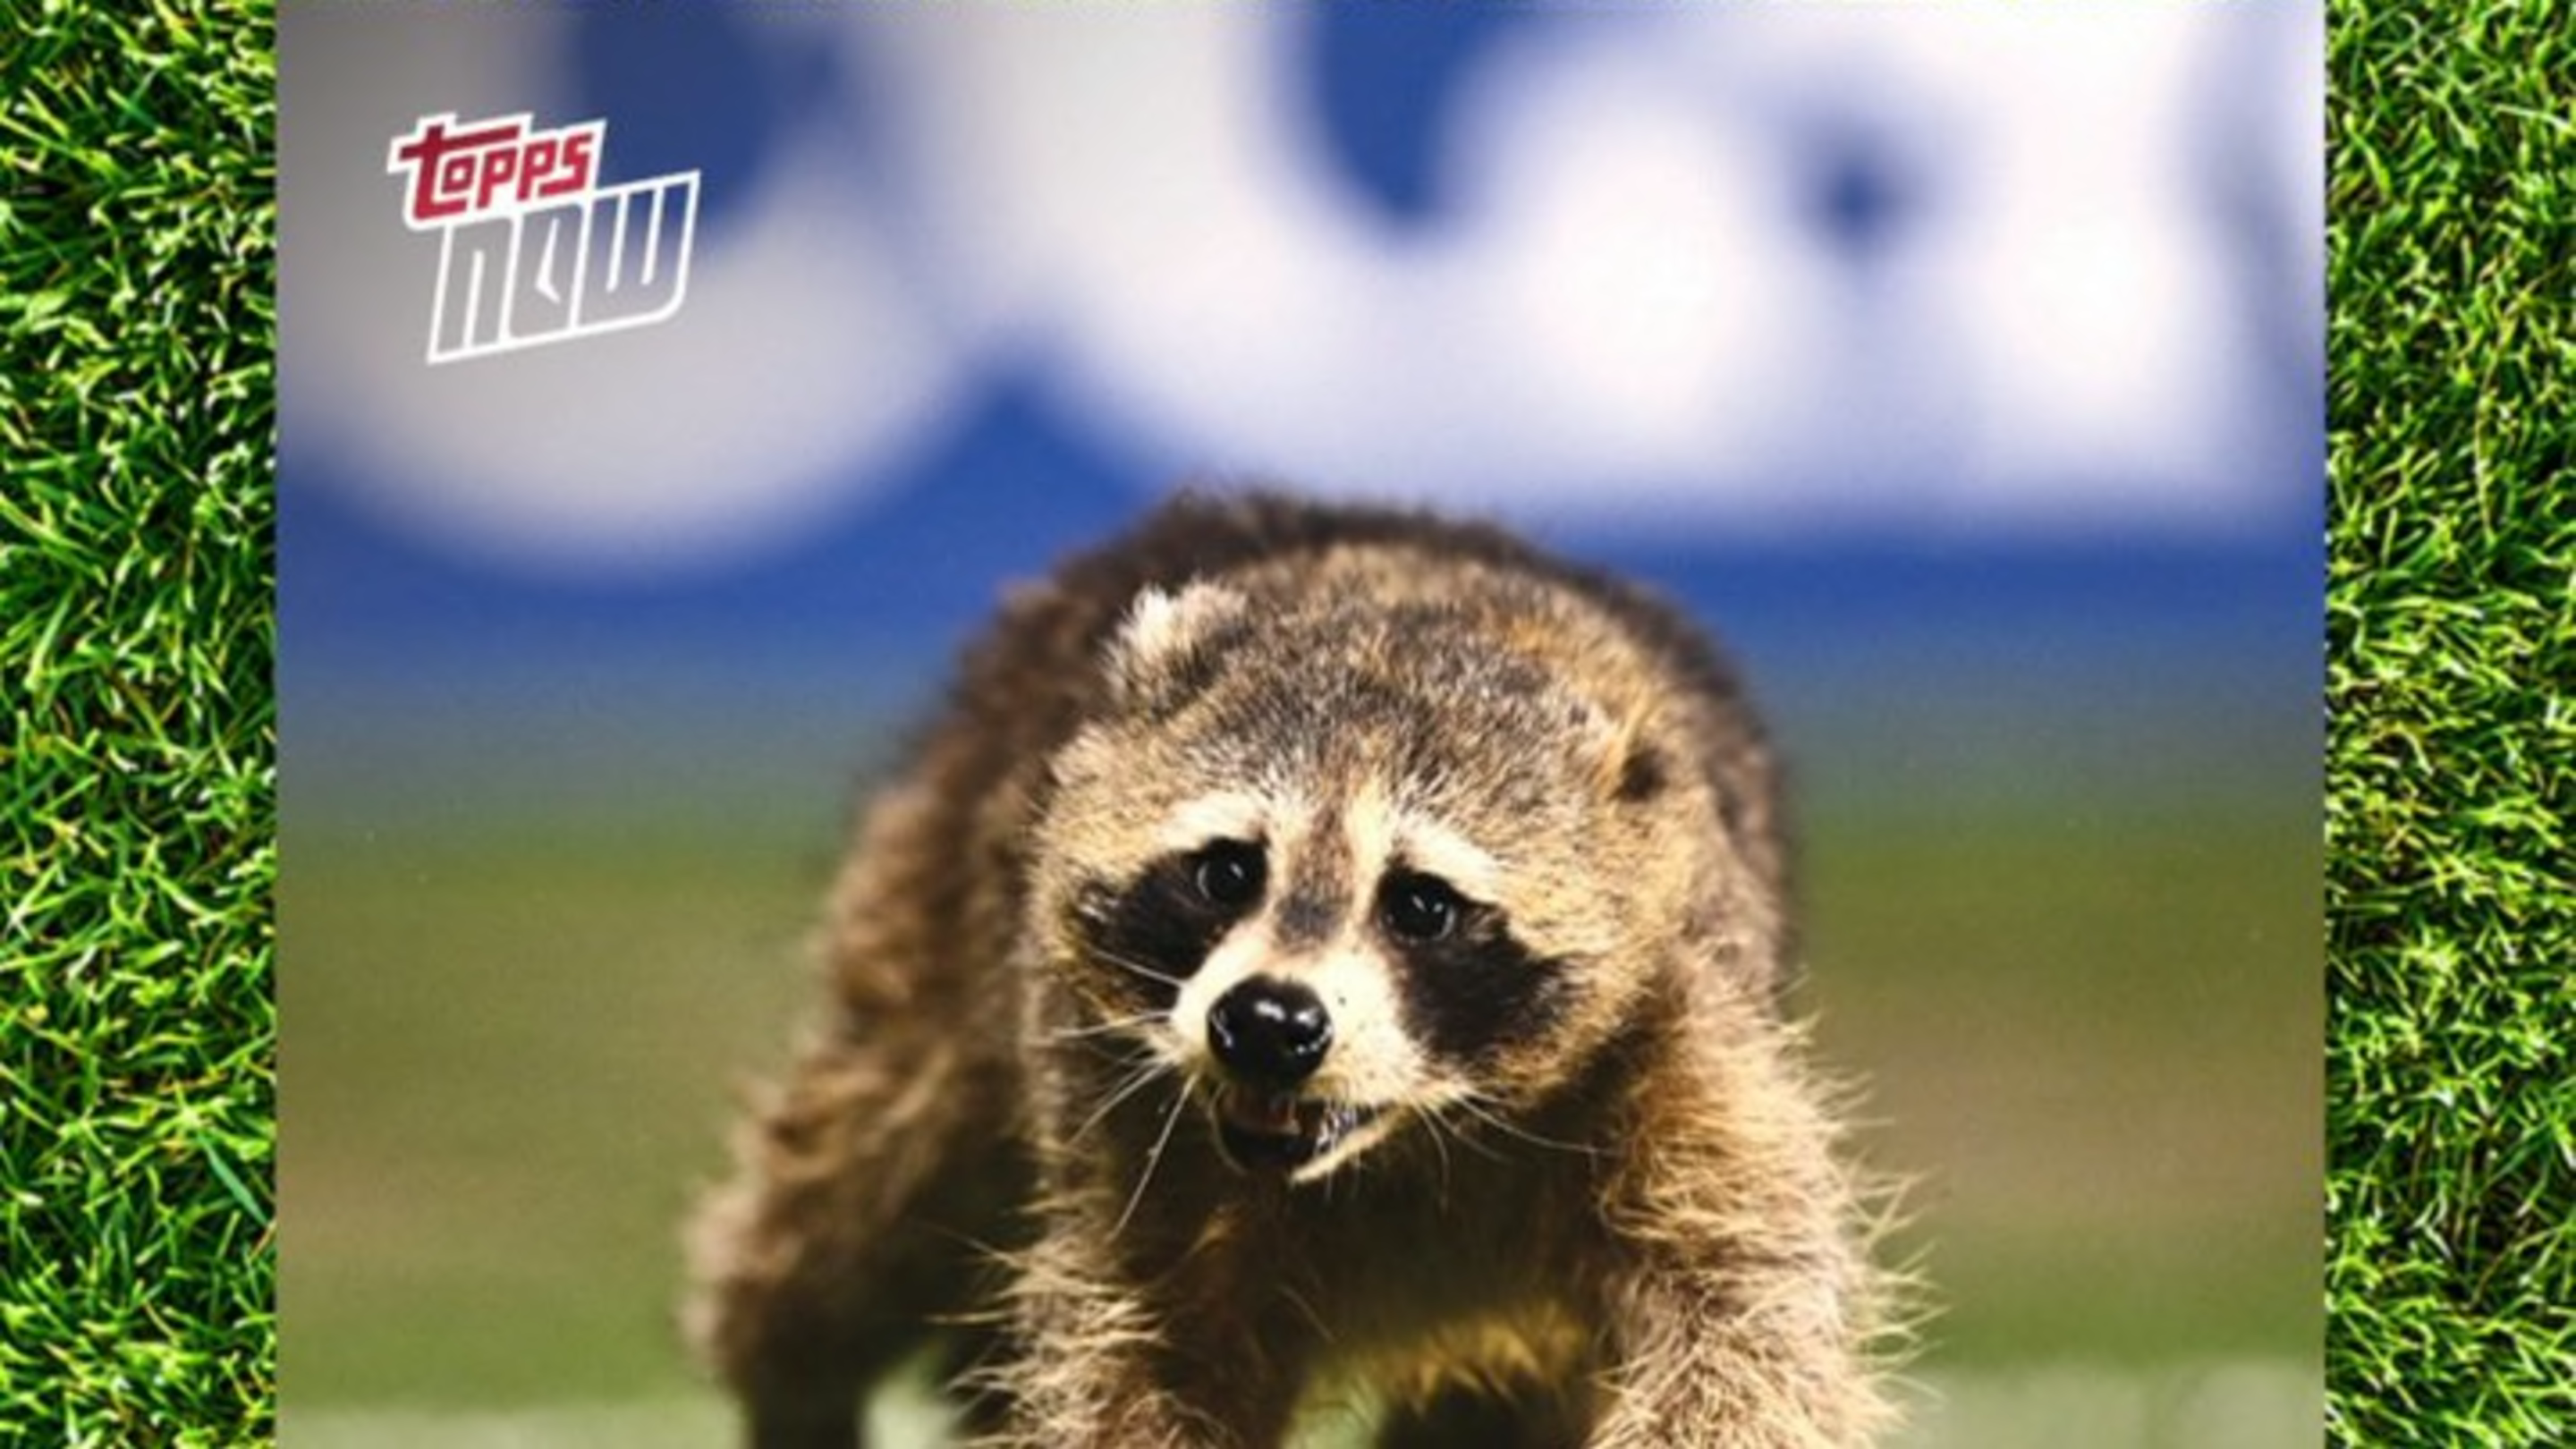 Raquinho the raccoon gets very own MLS Topps Now trading card